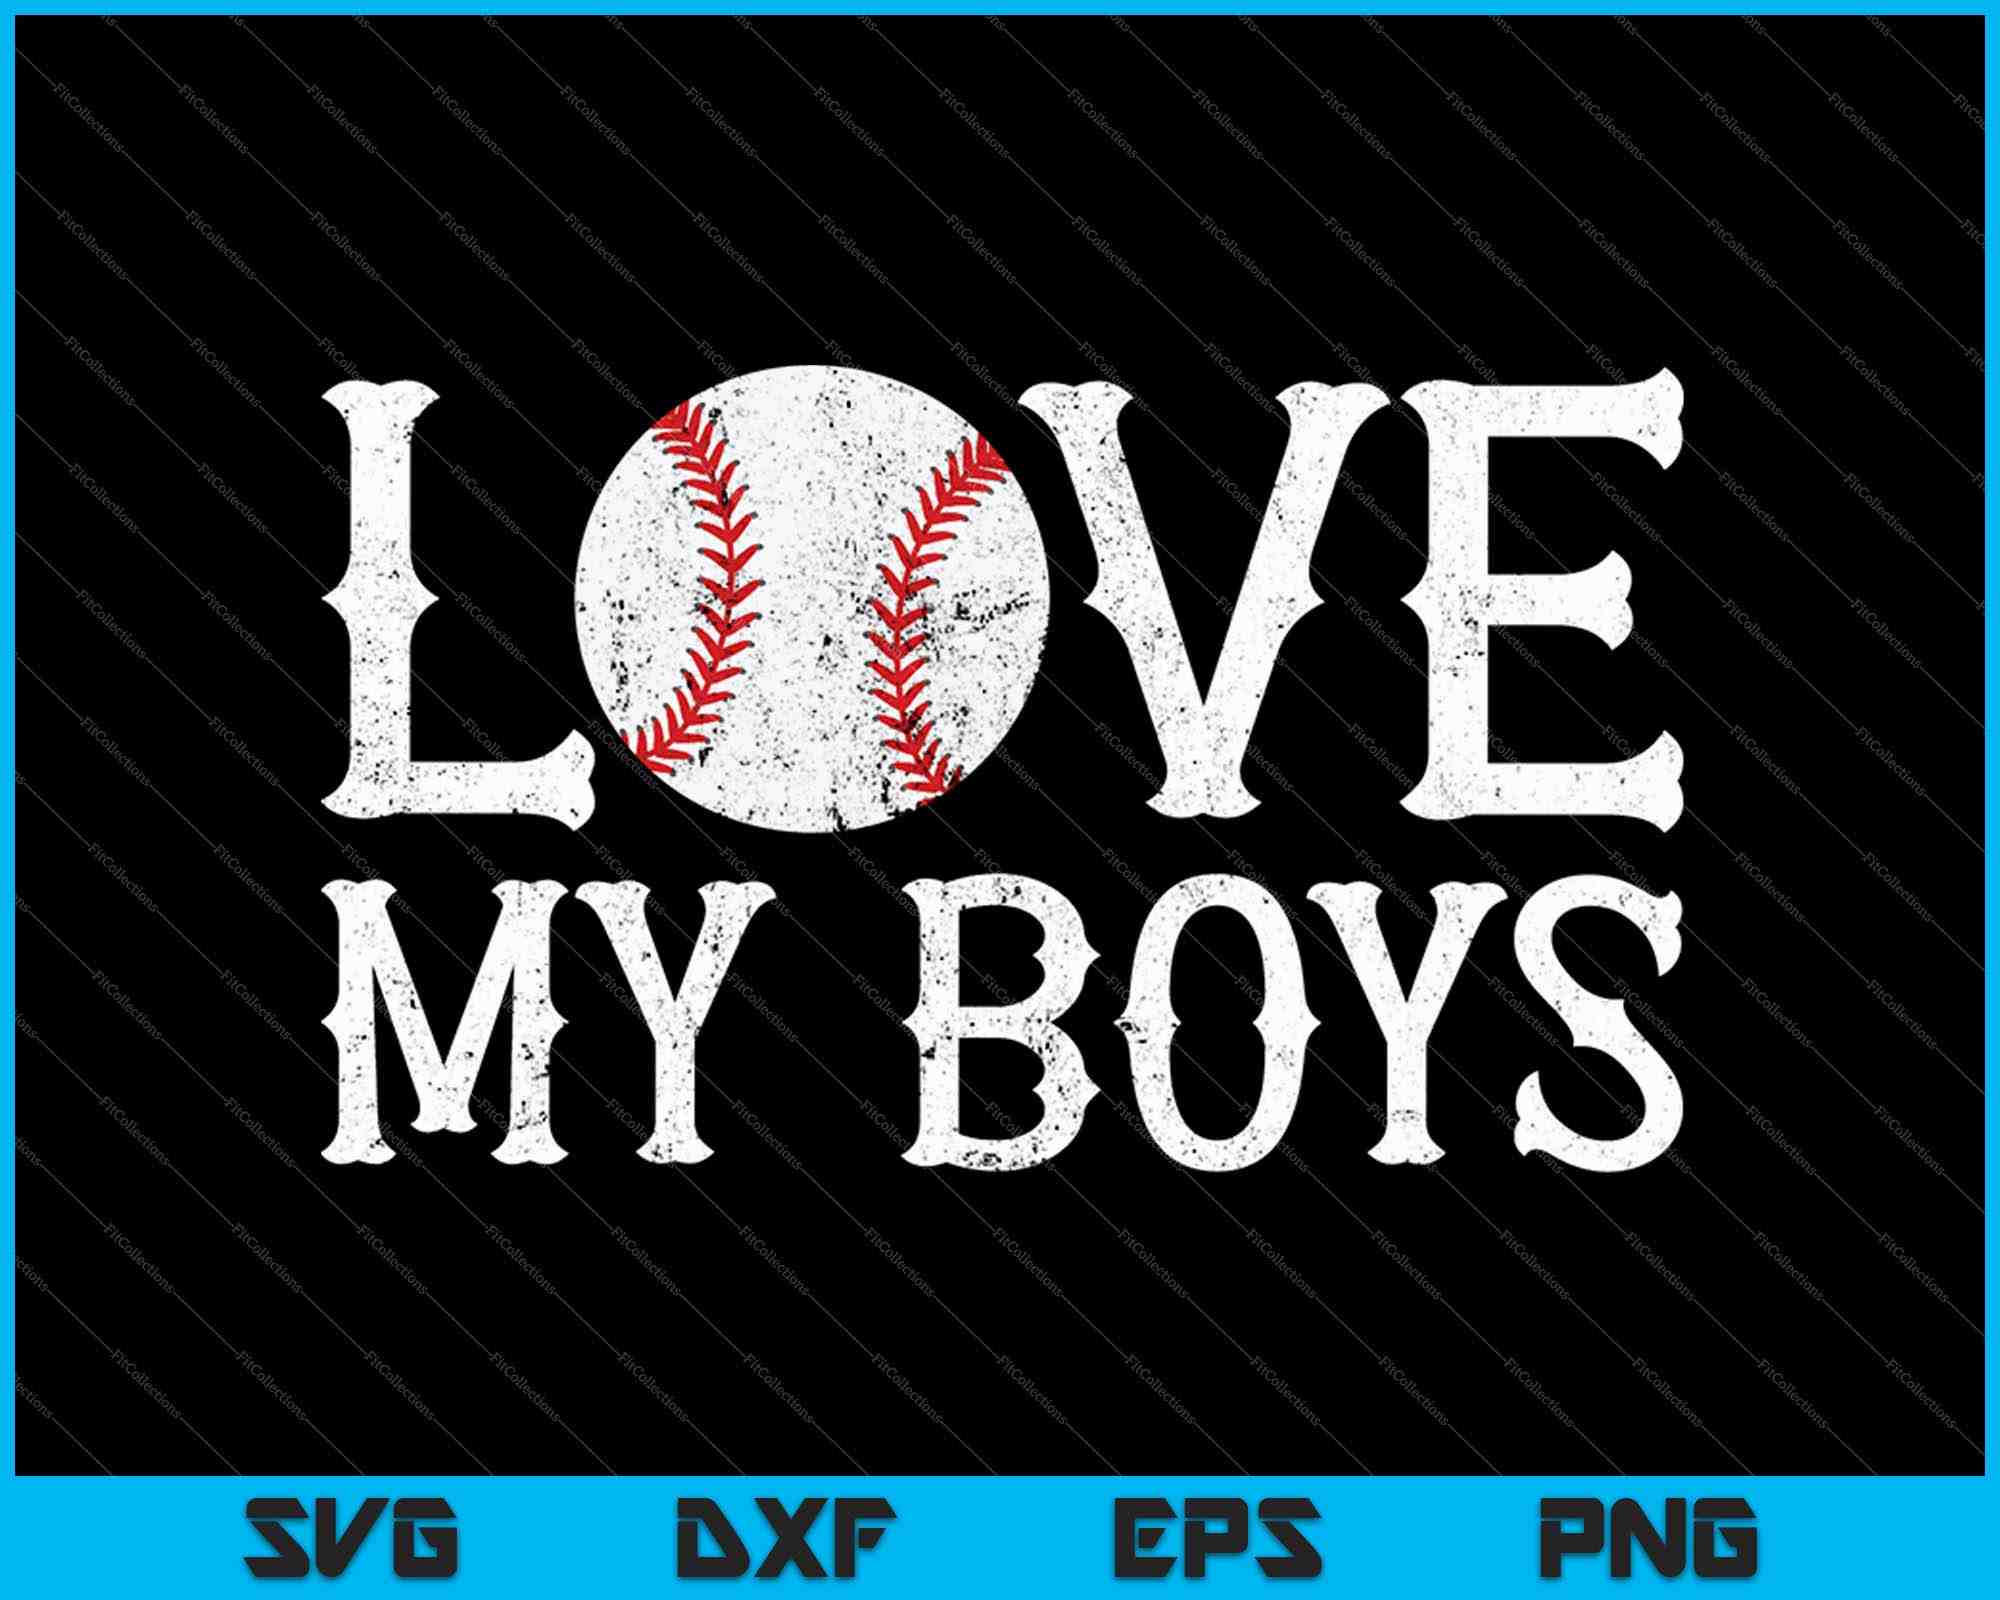 St. Louis Baseball SVG PNG Cutting File Graphic by SVG store